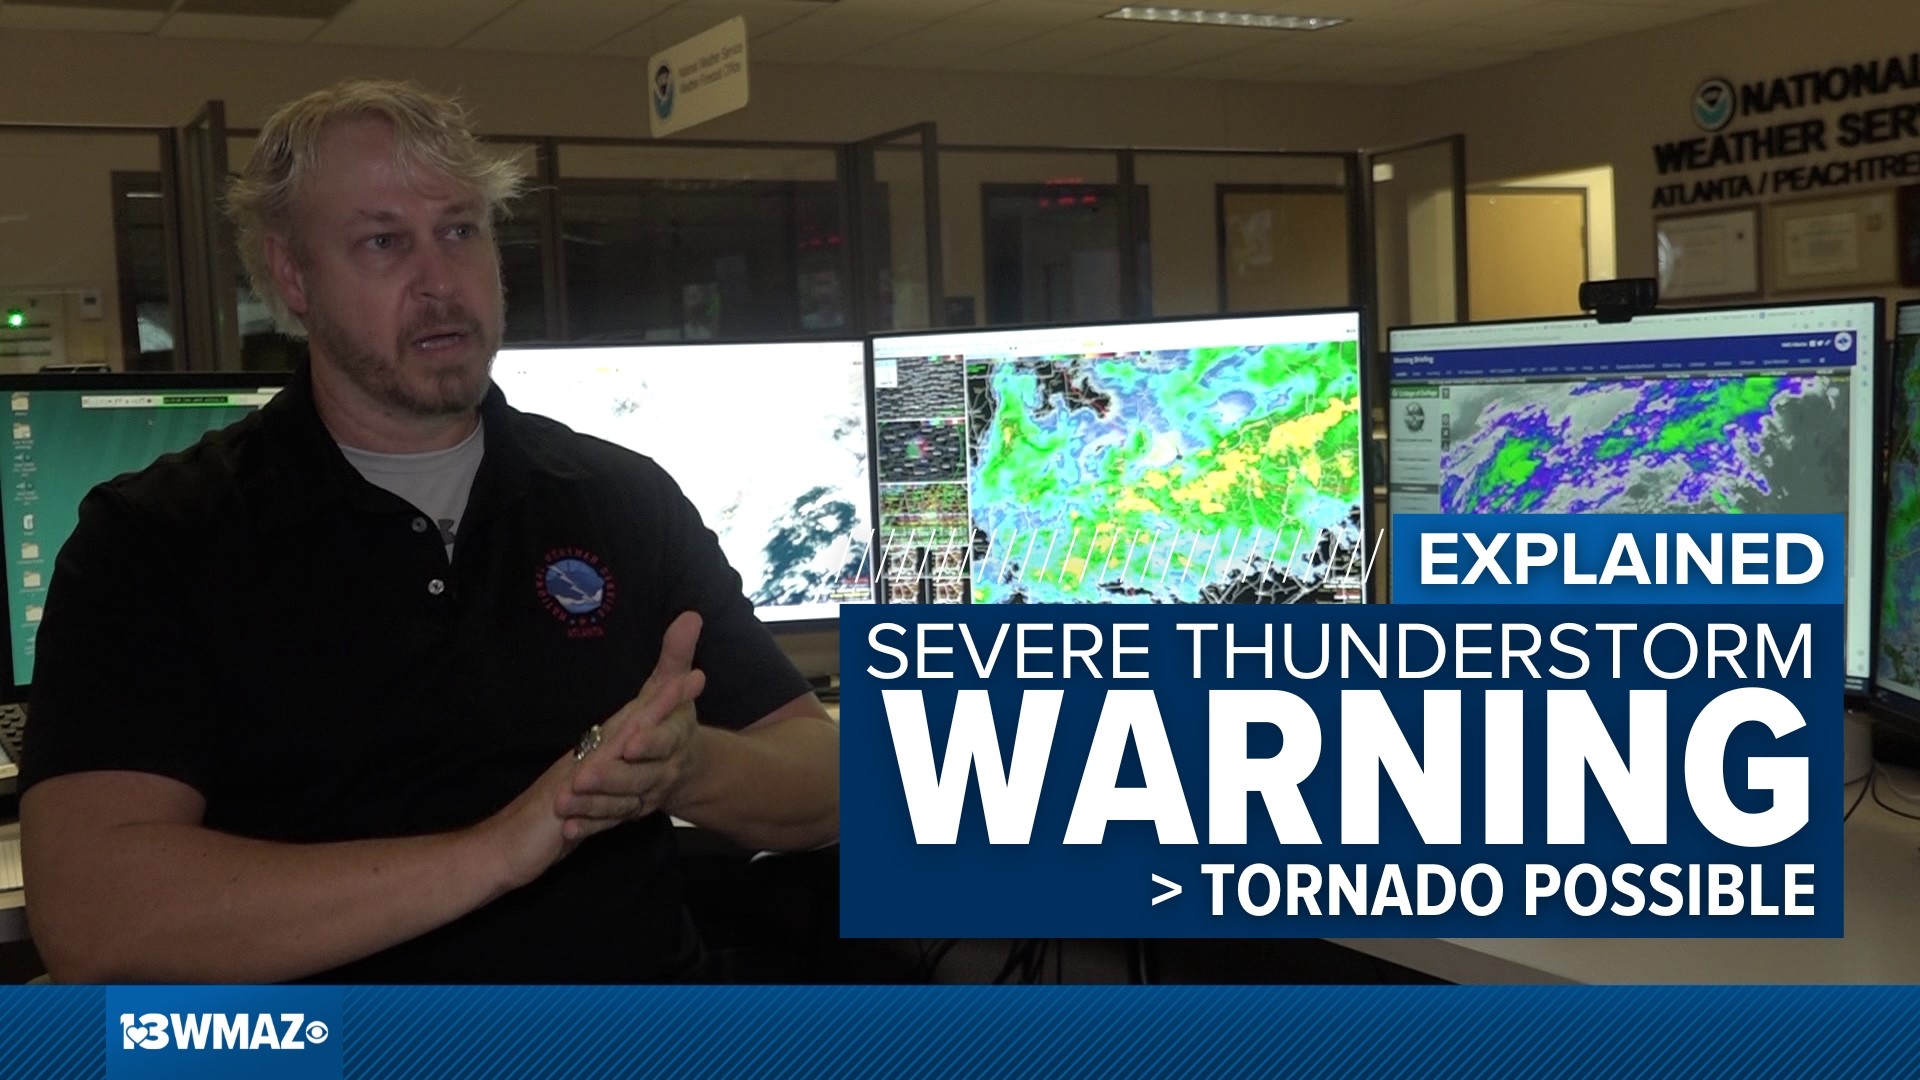 NWS Atlanta Meteorologist in Charge Keith Stellman shares what it means to have a Severe Thunderstorm Warning with a "tornado possible" tag.